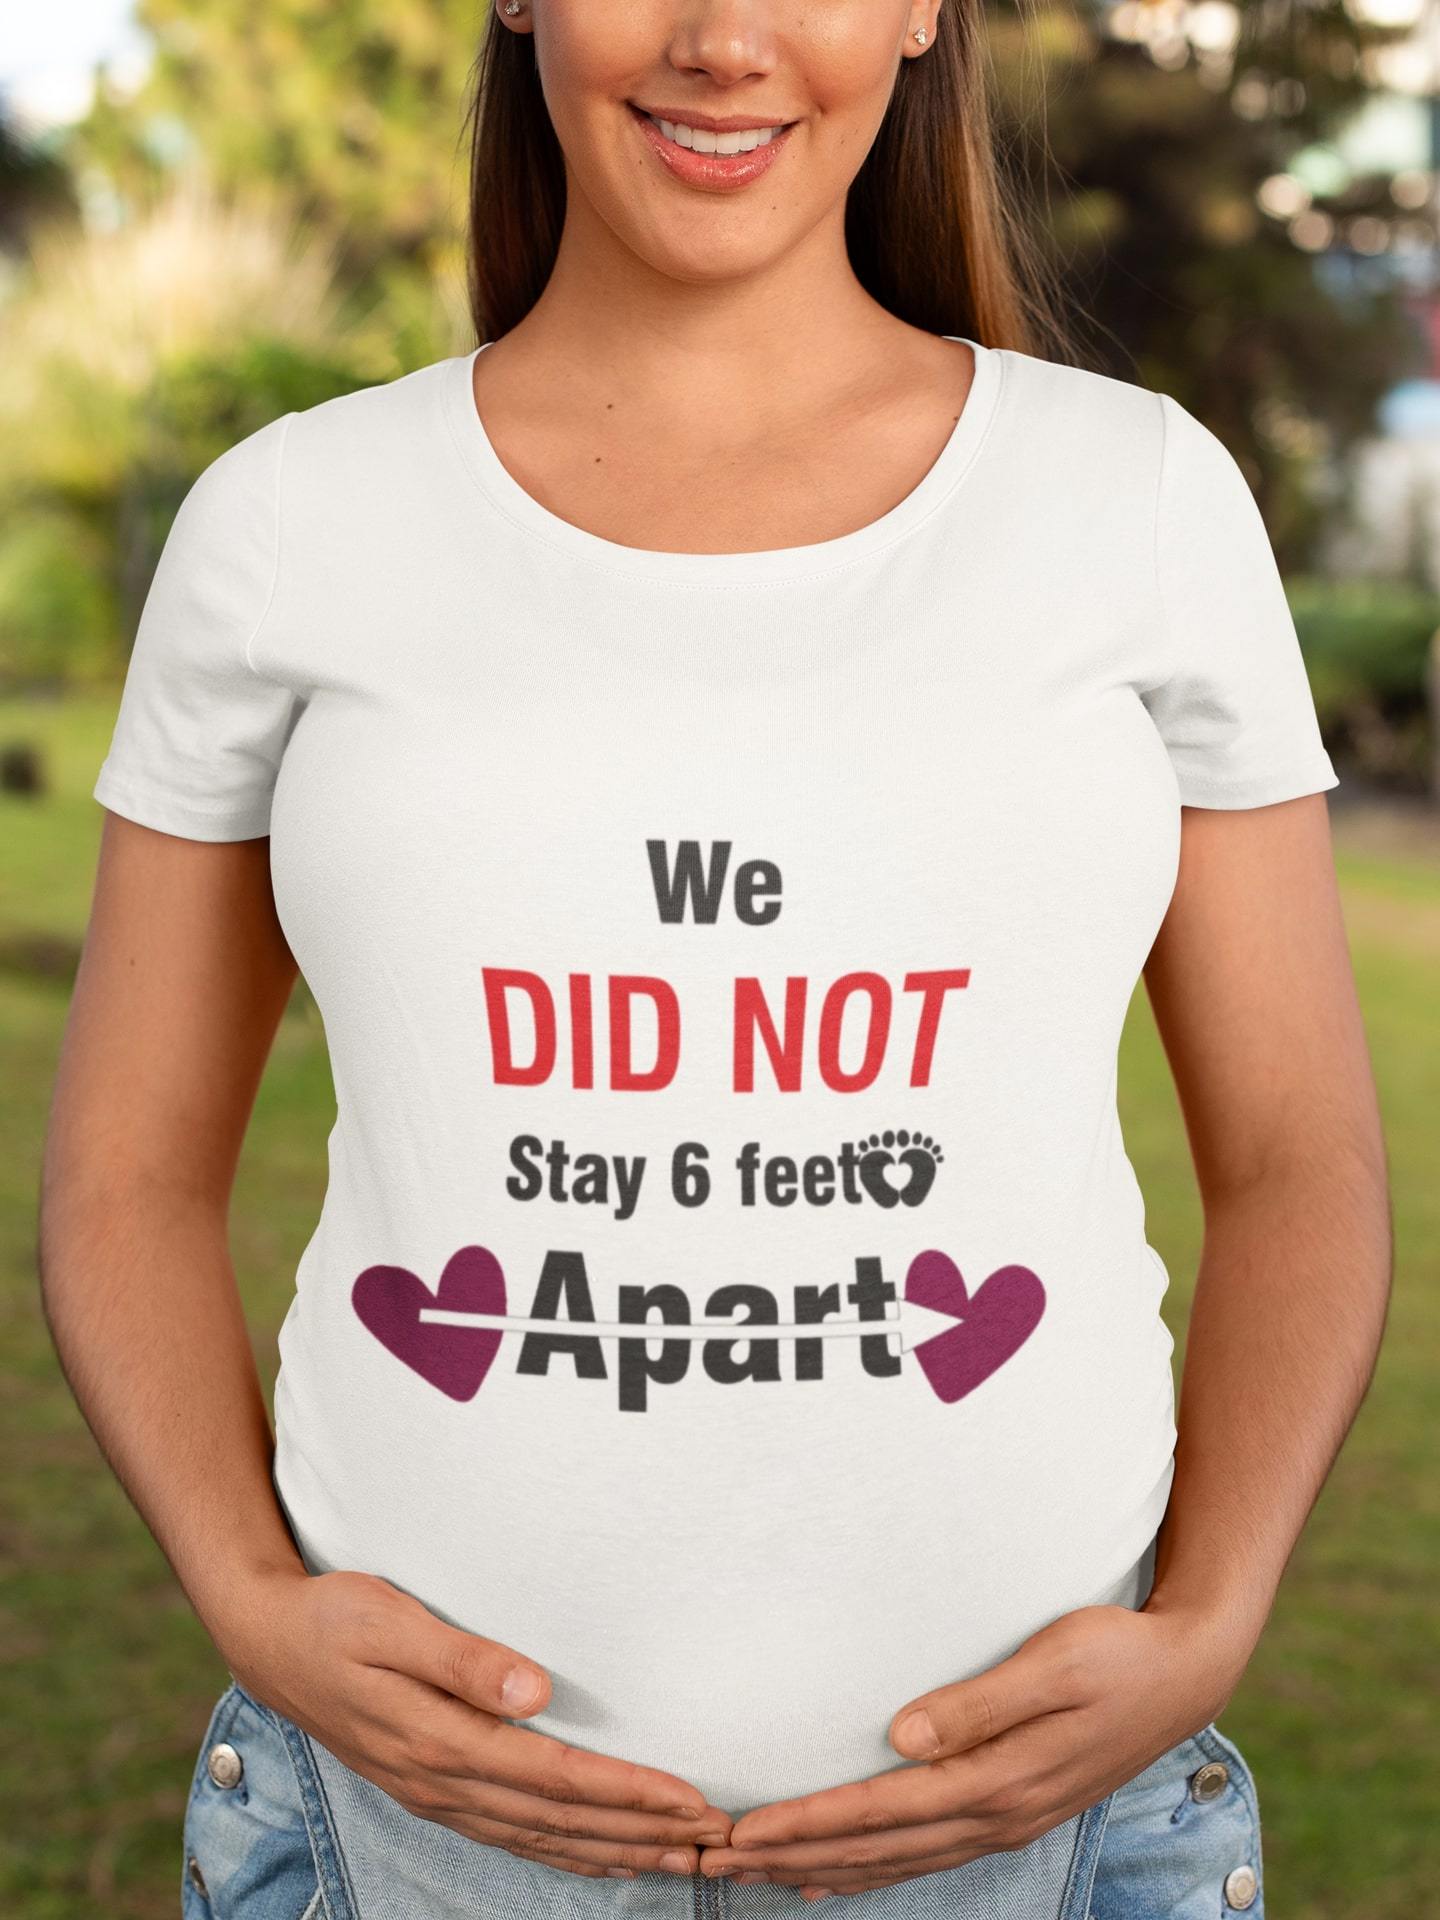 thelegalgang,We did not Stay 6 feet Apart Graphic Maternity T shirt,WOMEN.